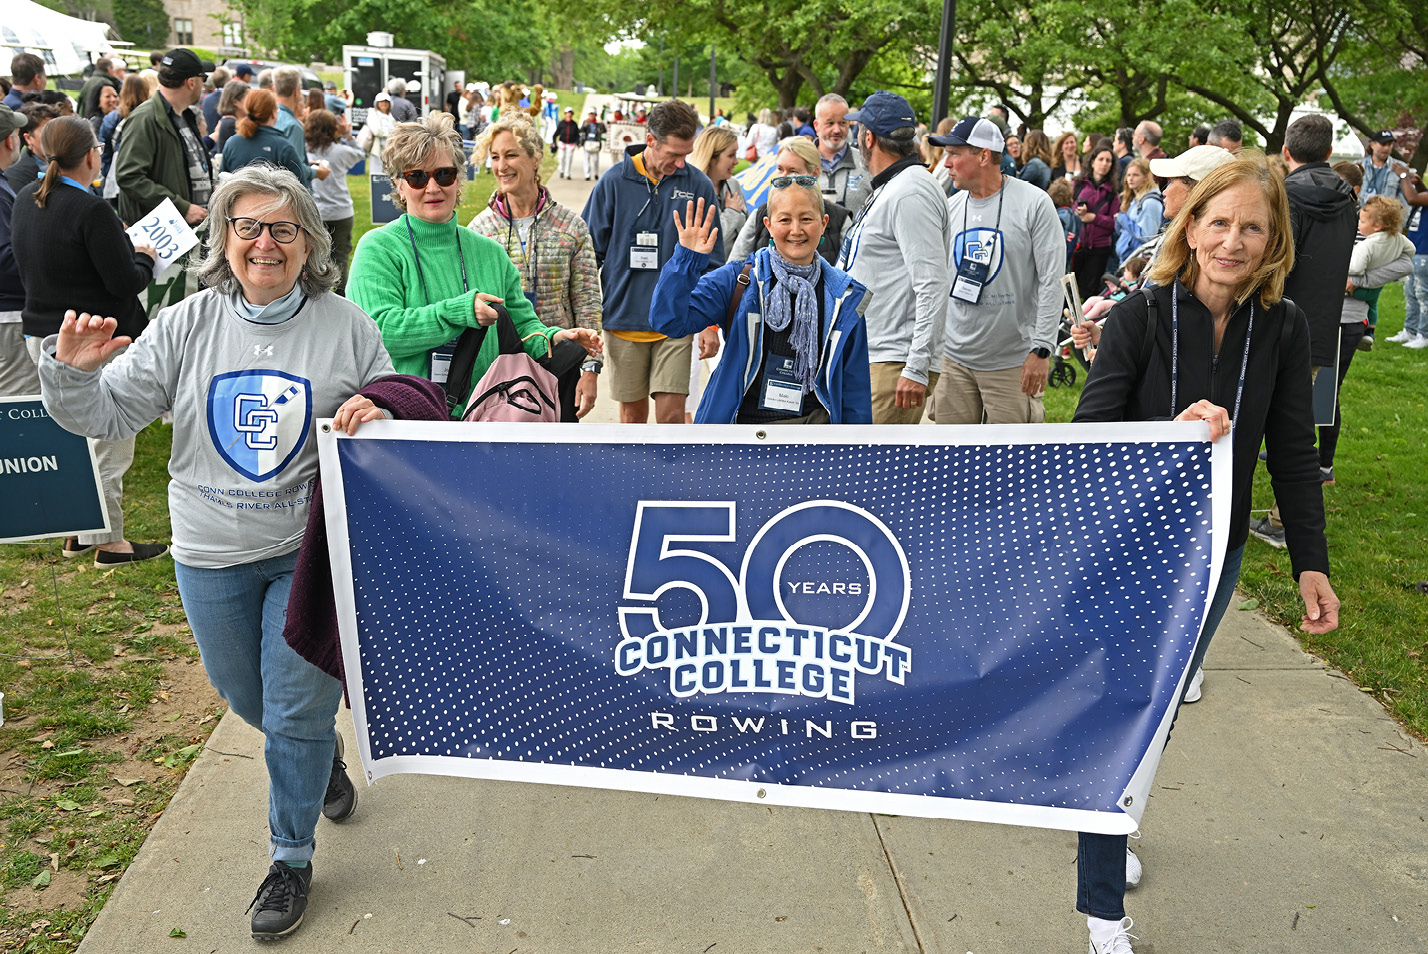 Alums hold a 50th Rowing Reunion banner during the Reunion parade.